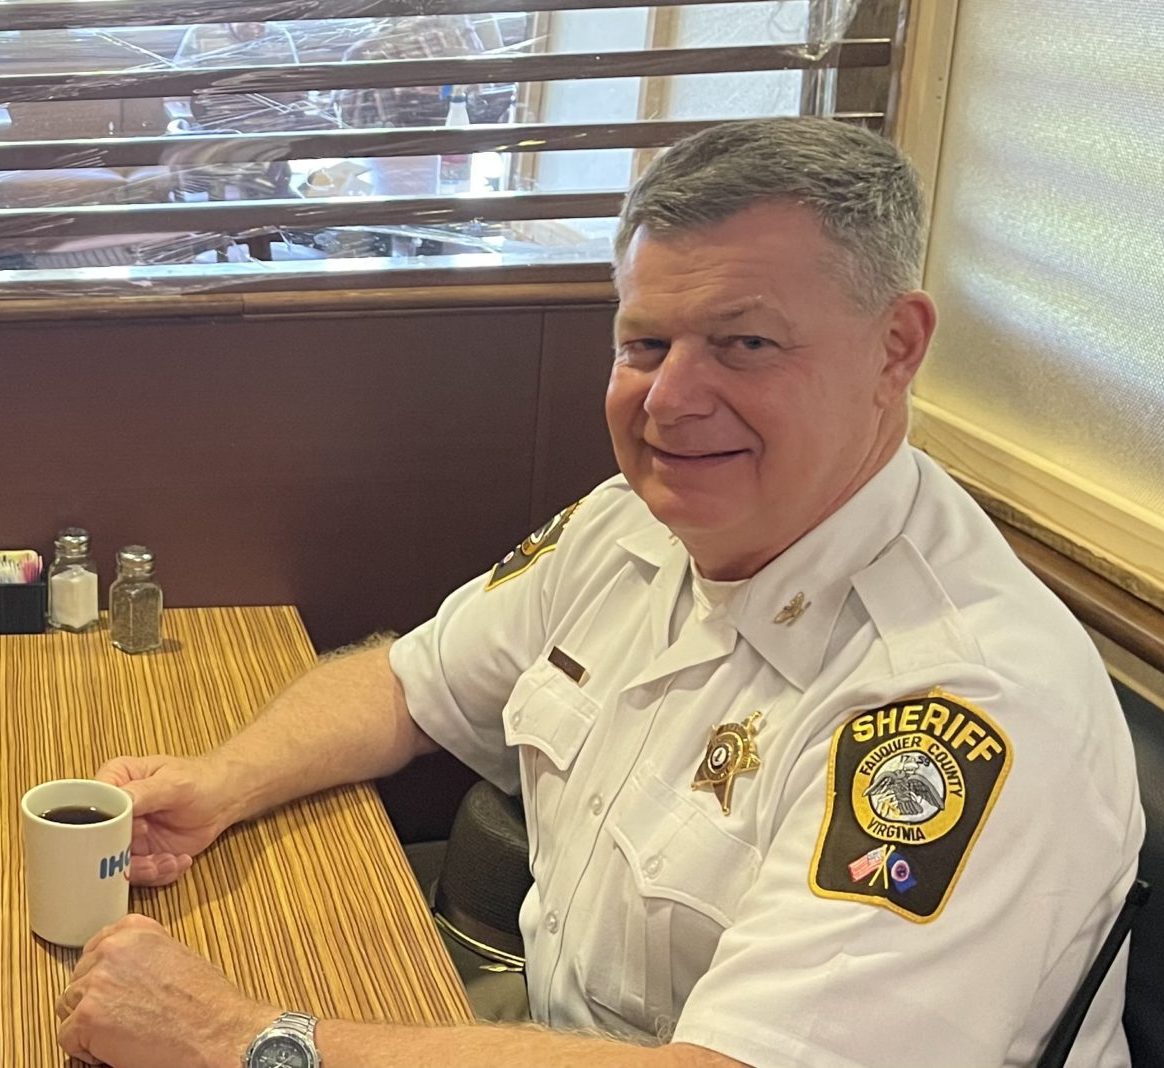 ATI Chairman of the Board, Sheriff Bob Mosier, at a restaurant table, smiling at the camera